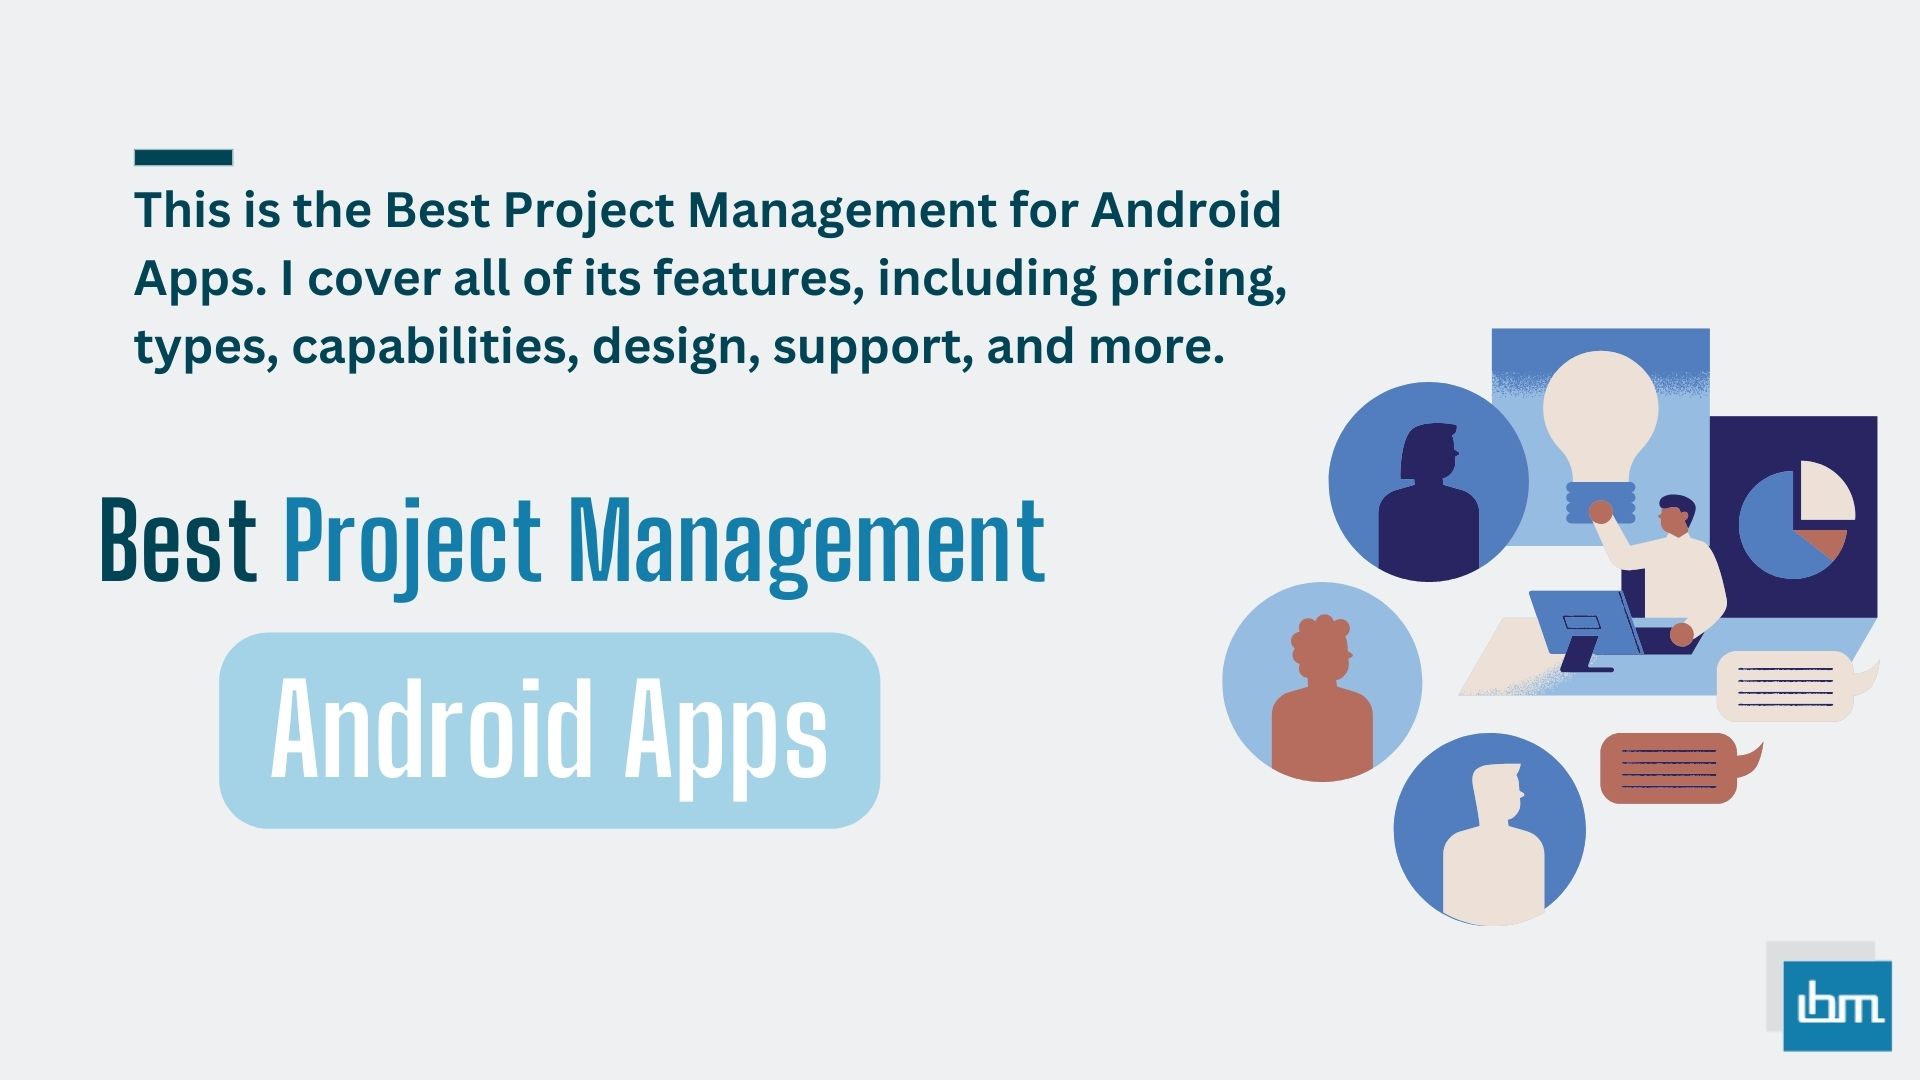 Best Project Management for Android Apps